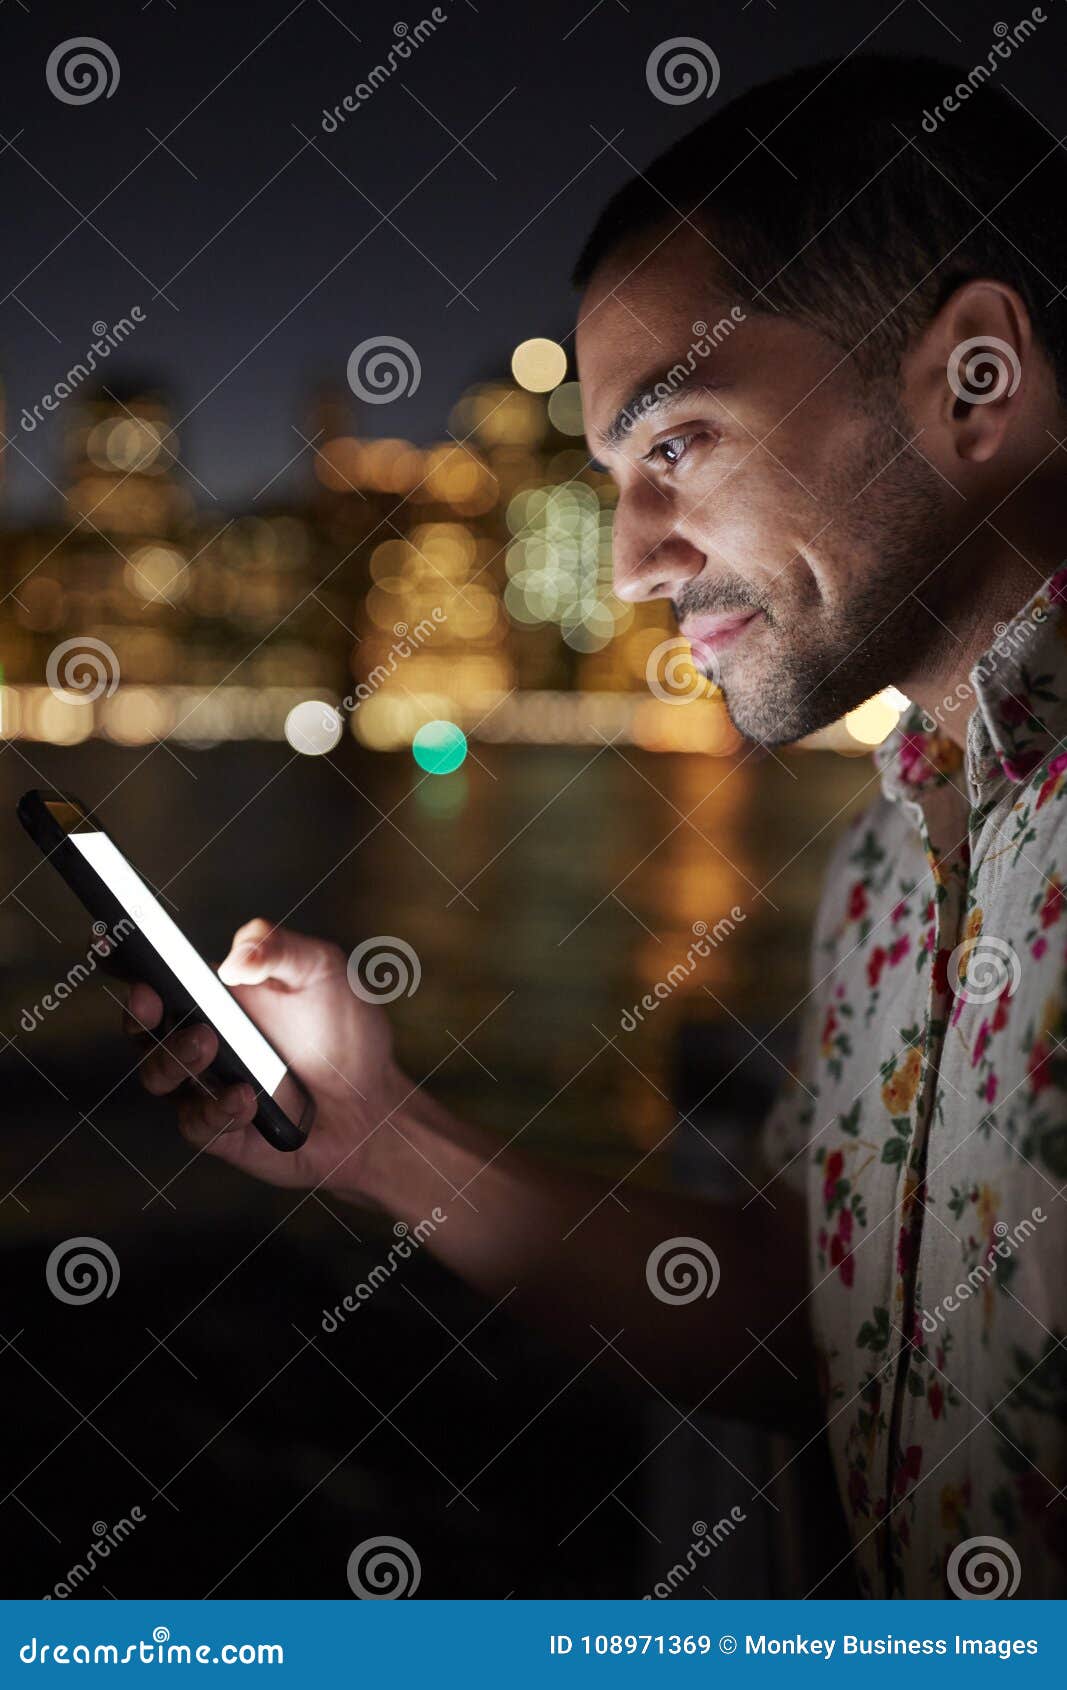 Man Using Mobile Phone At Night With City Skyline In